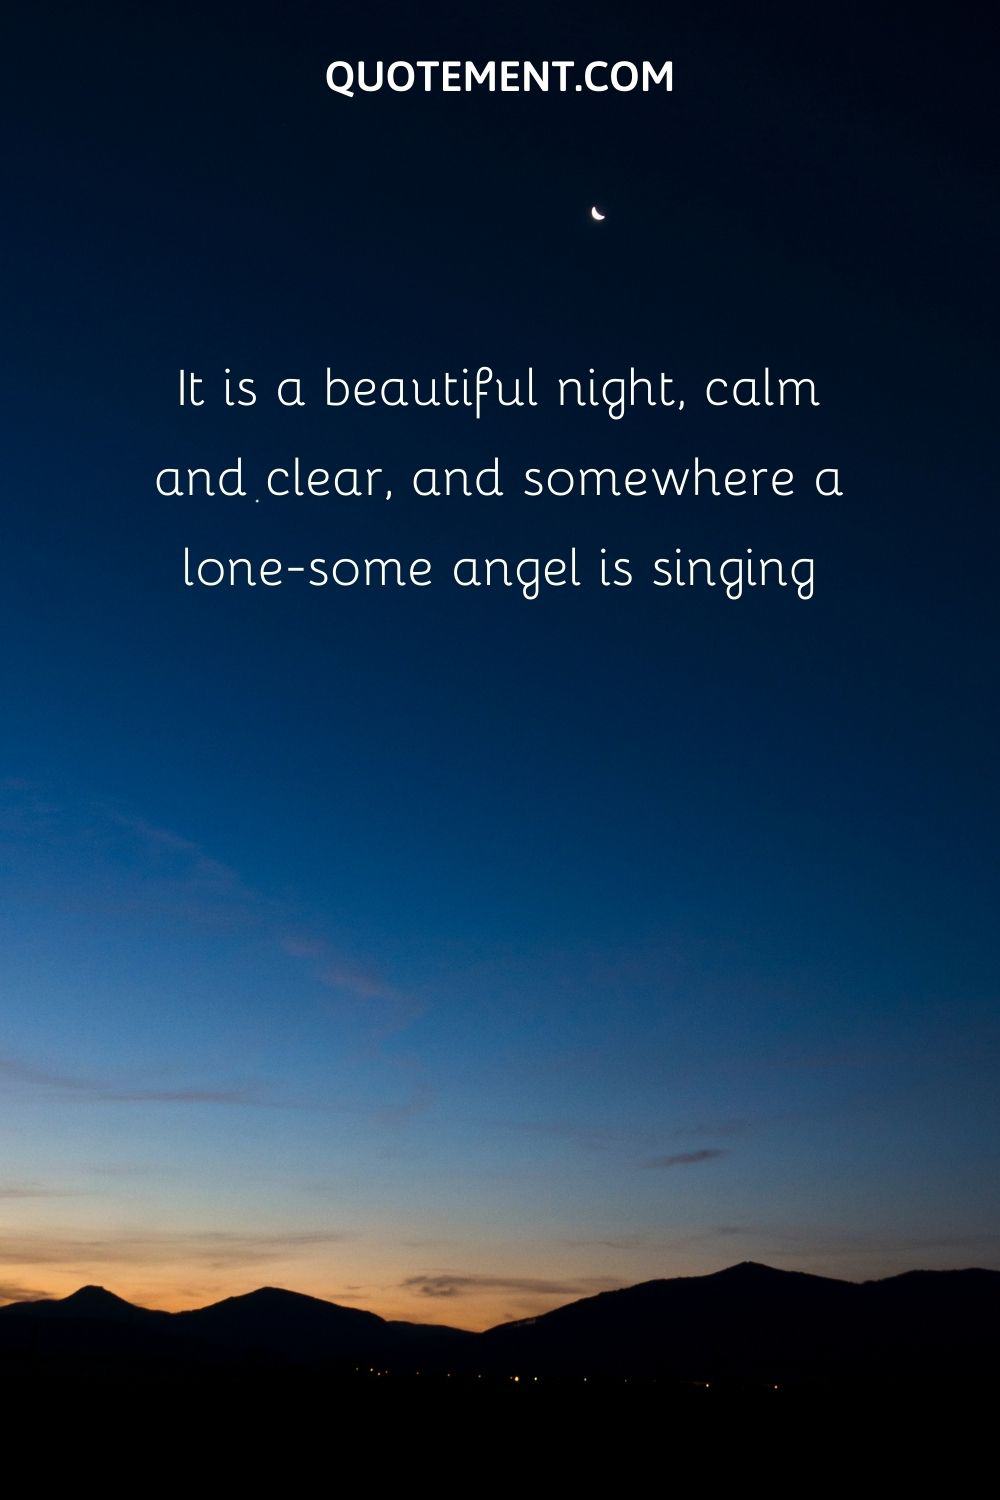 It is a beautiful night, calm and clear, and somewhere a lone-some angel is singing